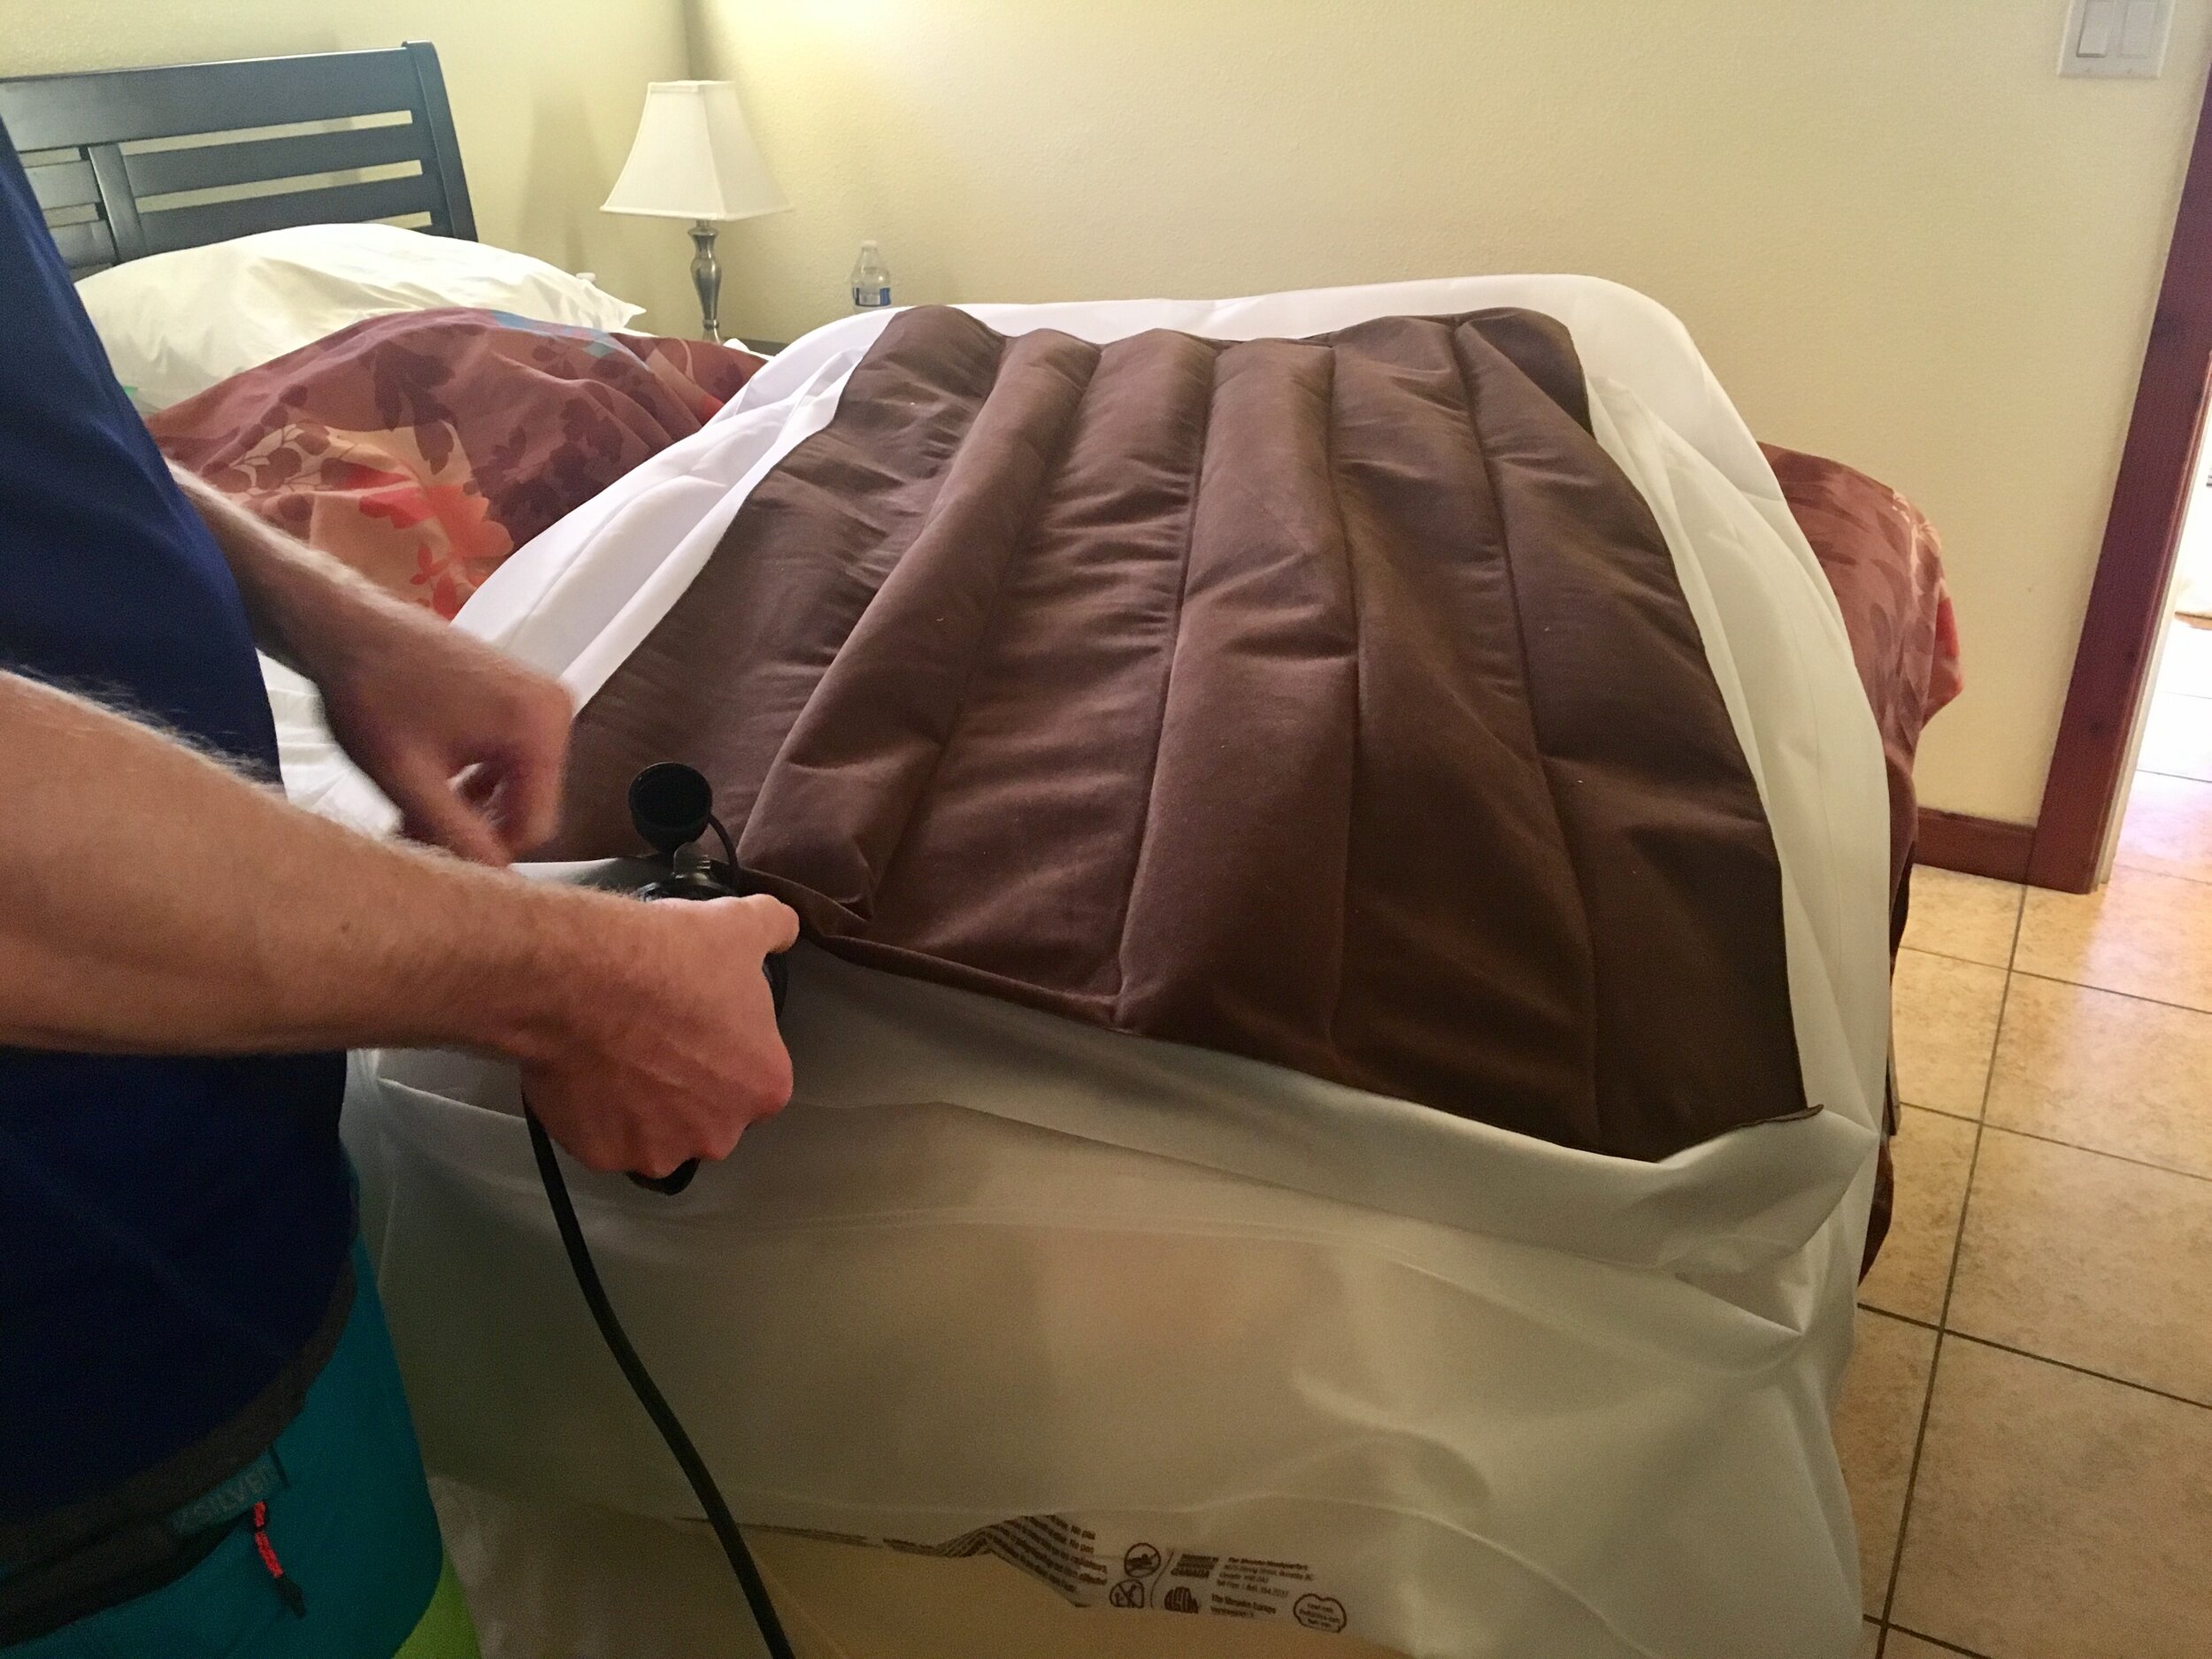 The Shrunks Toddler Travel Bed is perfect for Families on the go. Visit shortsweetmom.com to find out why this mattress will be with us on all of our travels. 